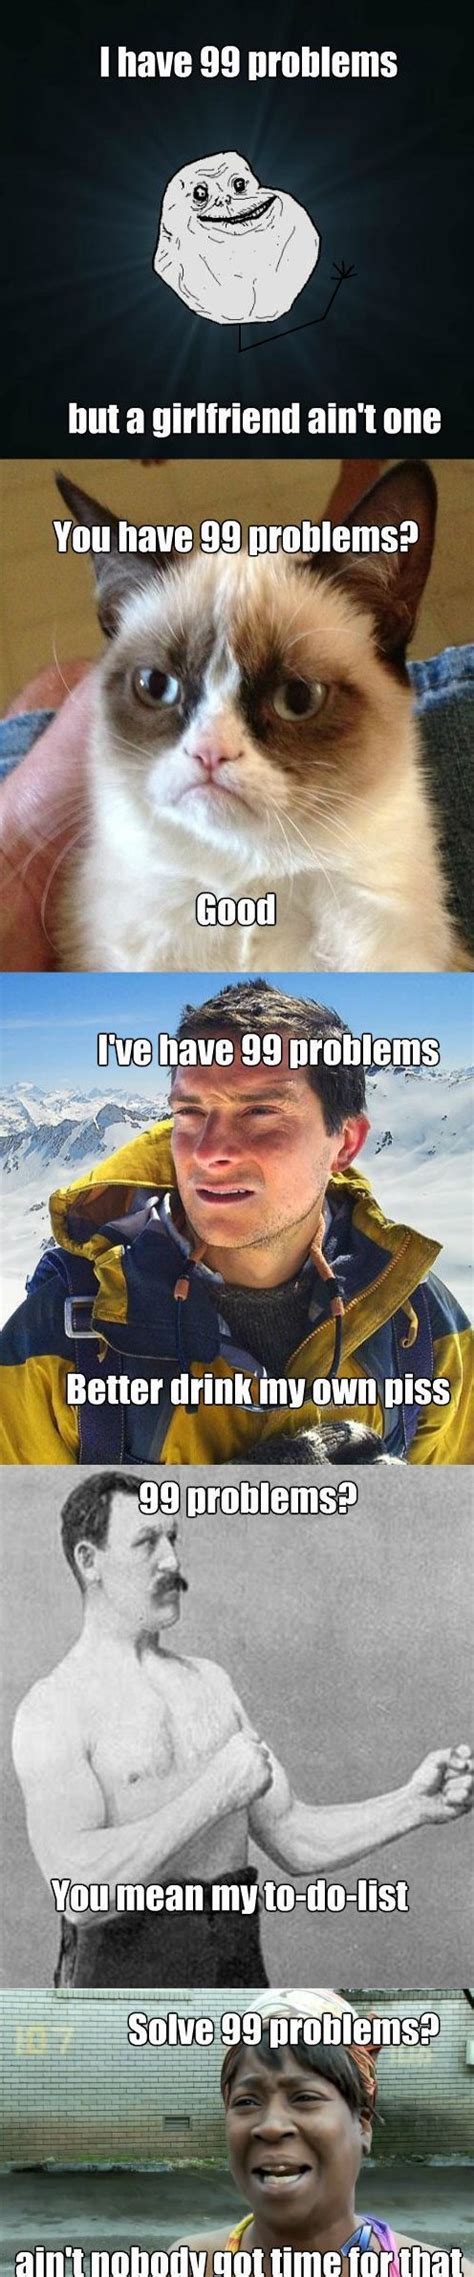 99 Problems Funlexia Funny Pictures